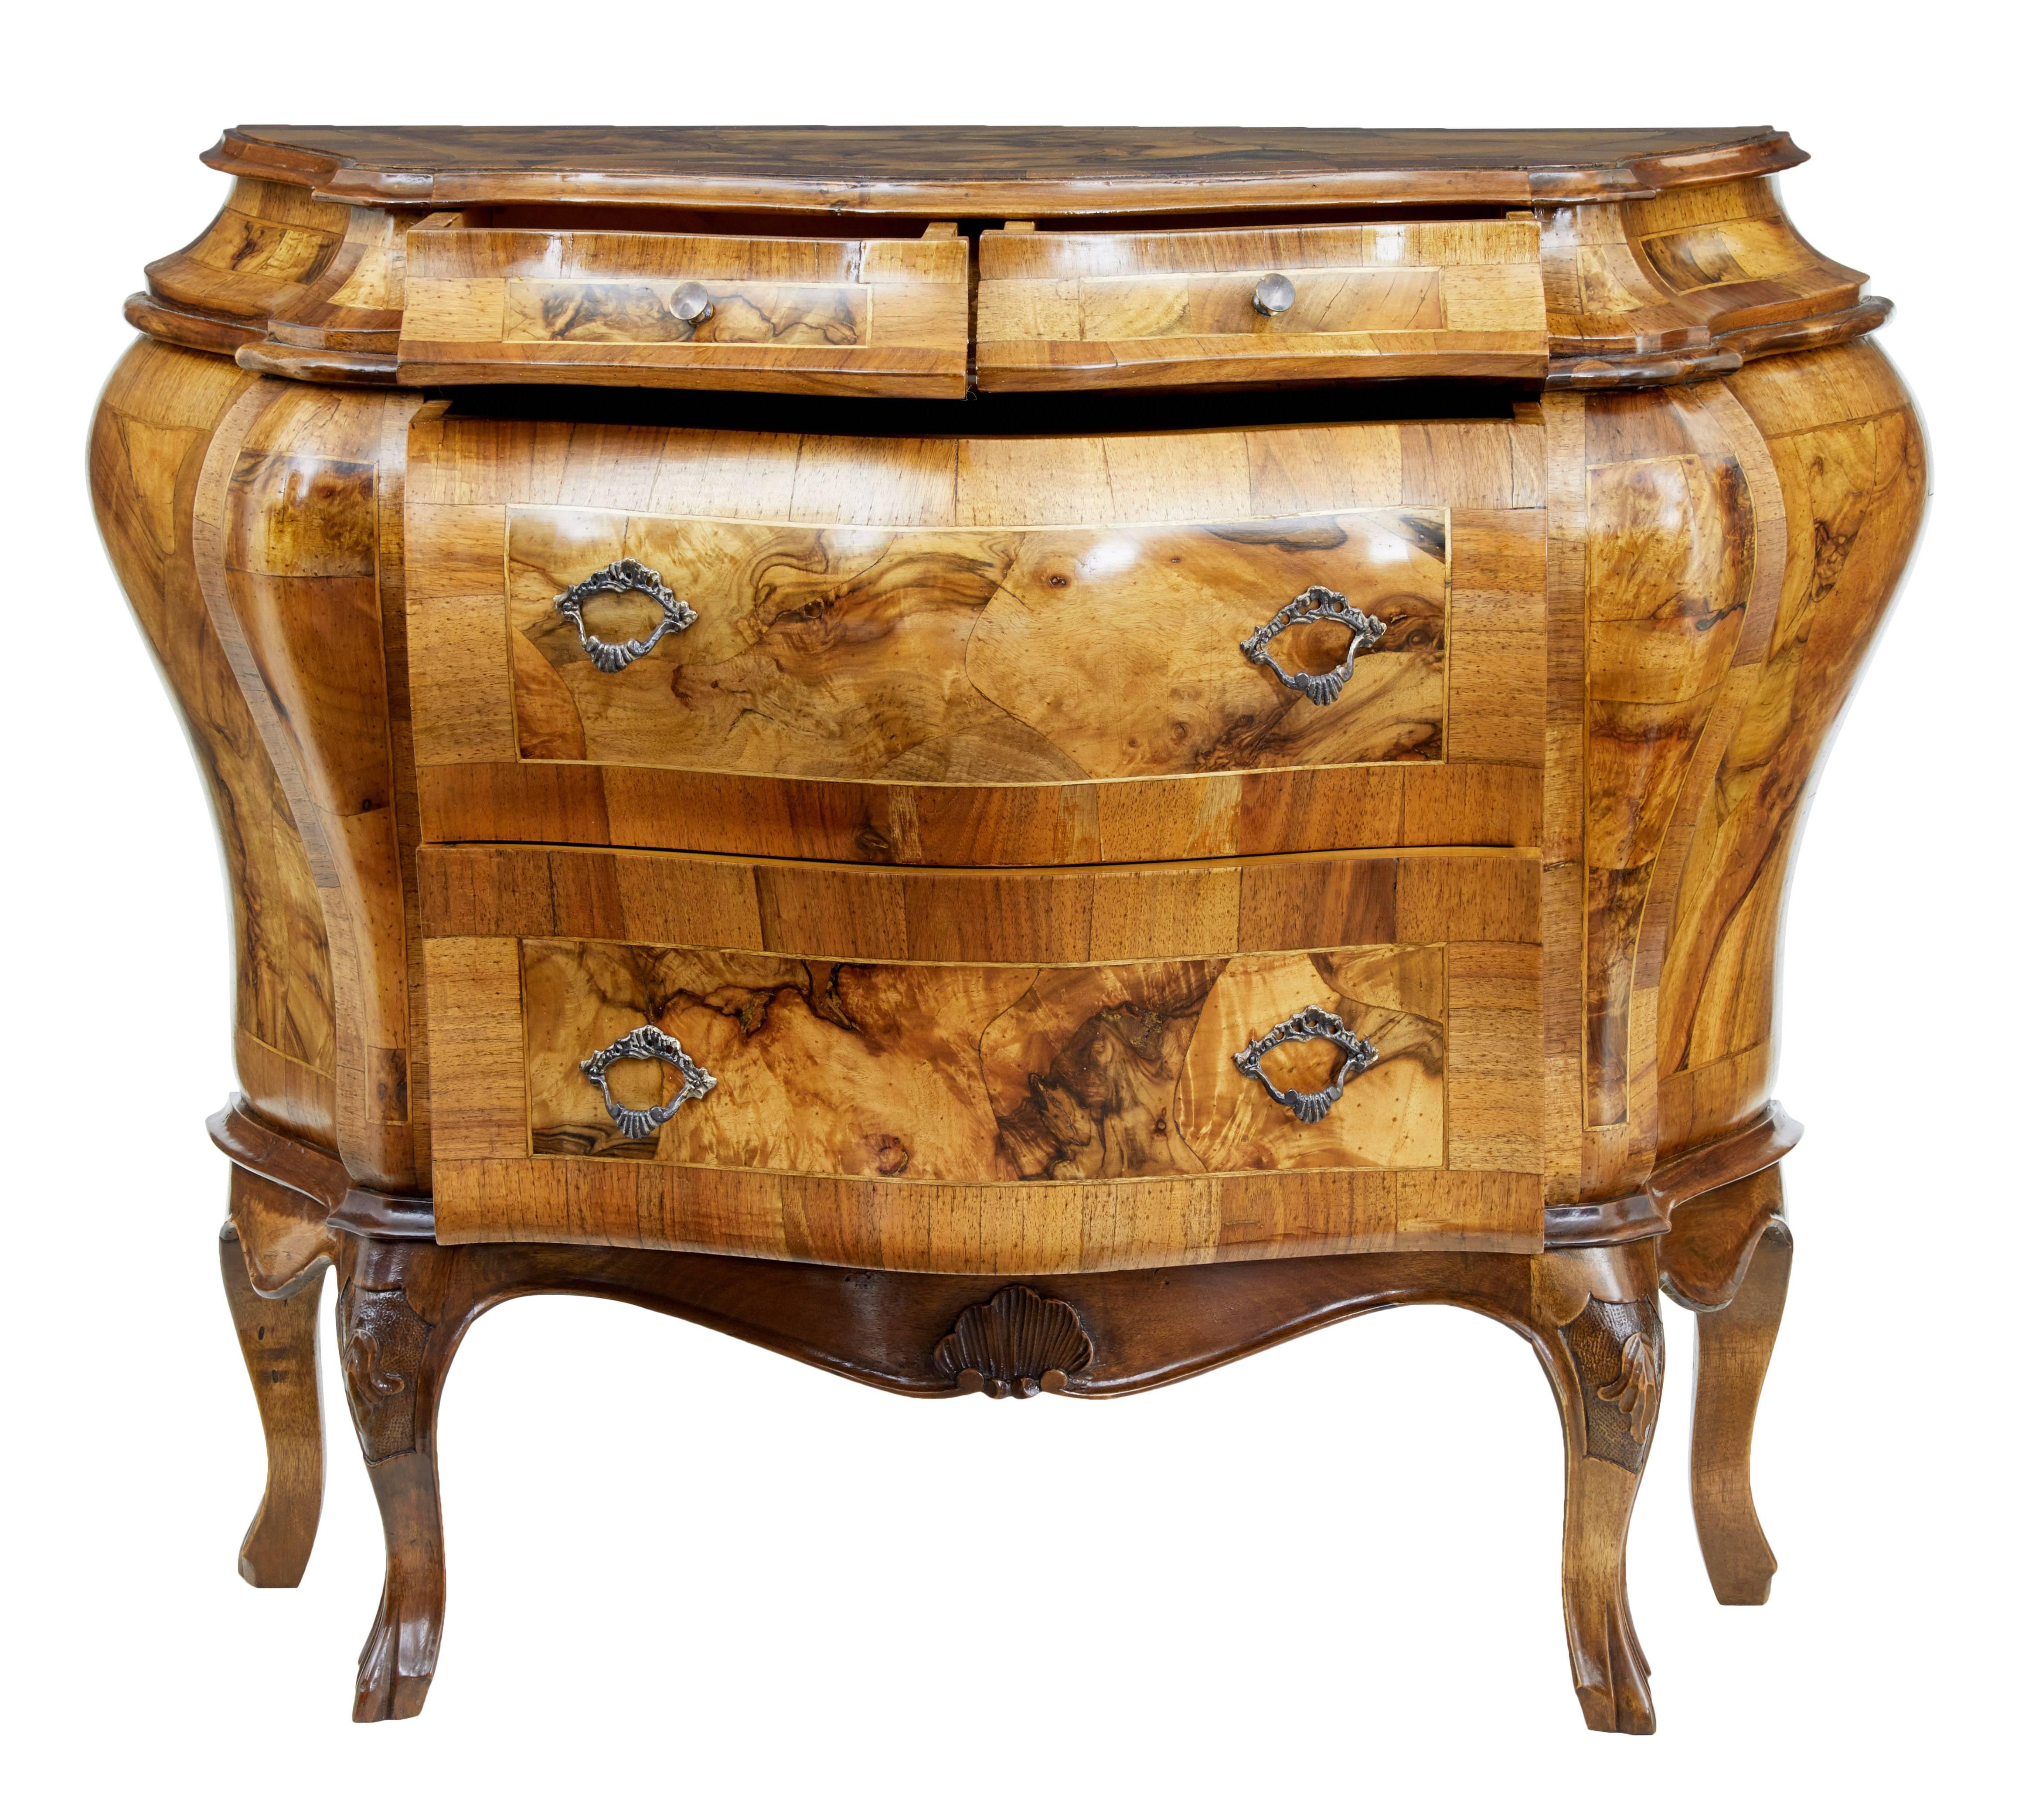 Elegant bombe shape commode from malta, circa 1900.

Made with stunning olivewood veneers over the traditional maltese carcass.

Two short drawers over two long. Brass button handles to the top drawers and ornate handles to the lower